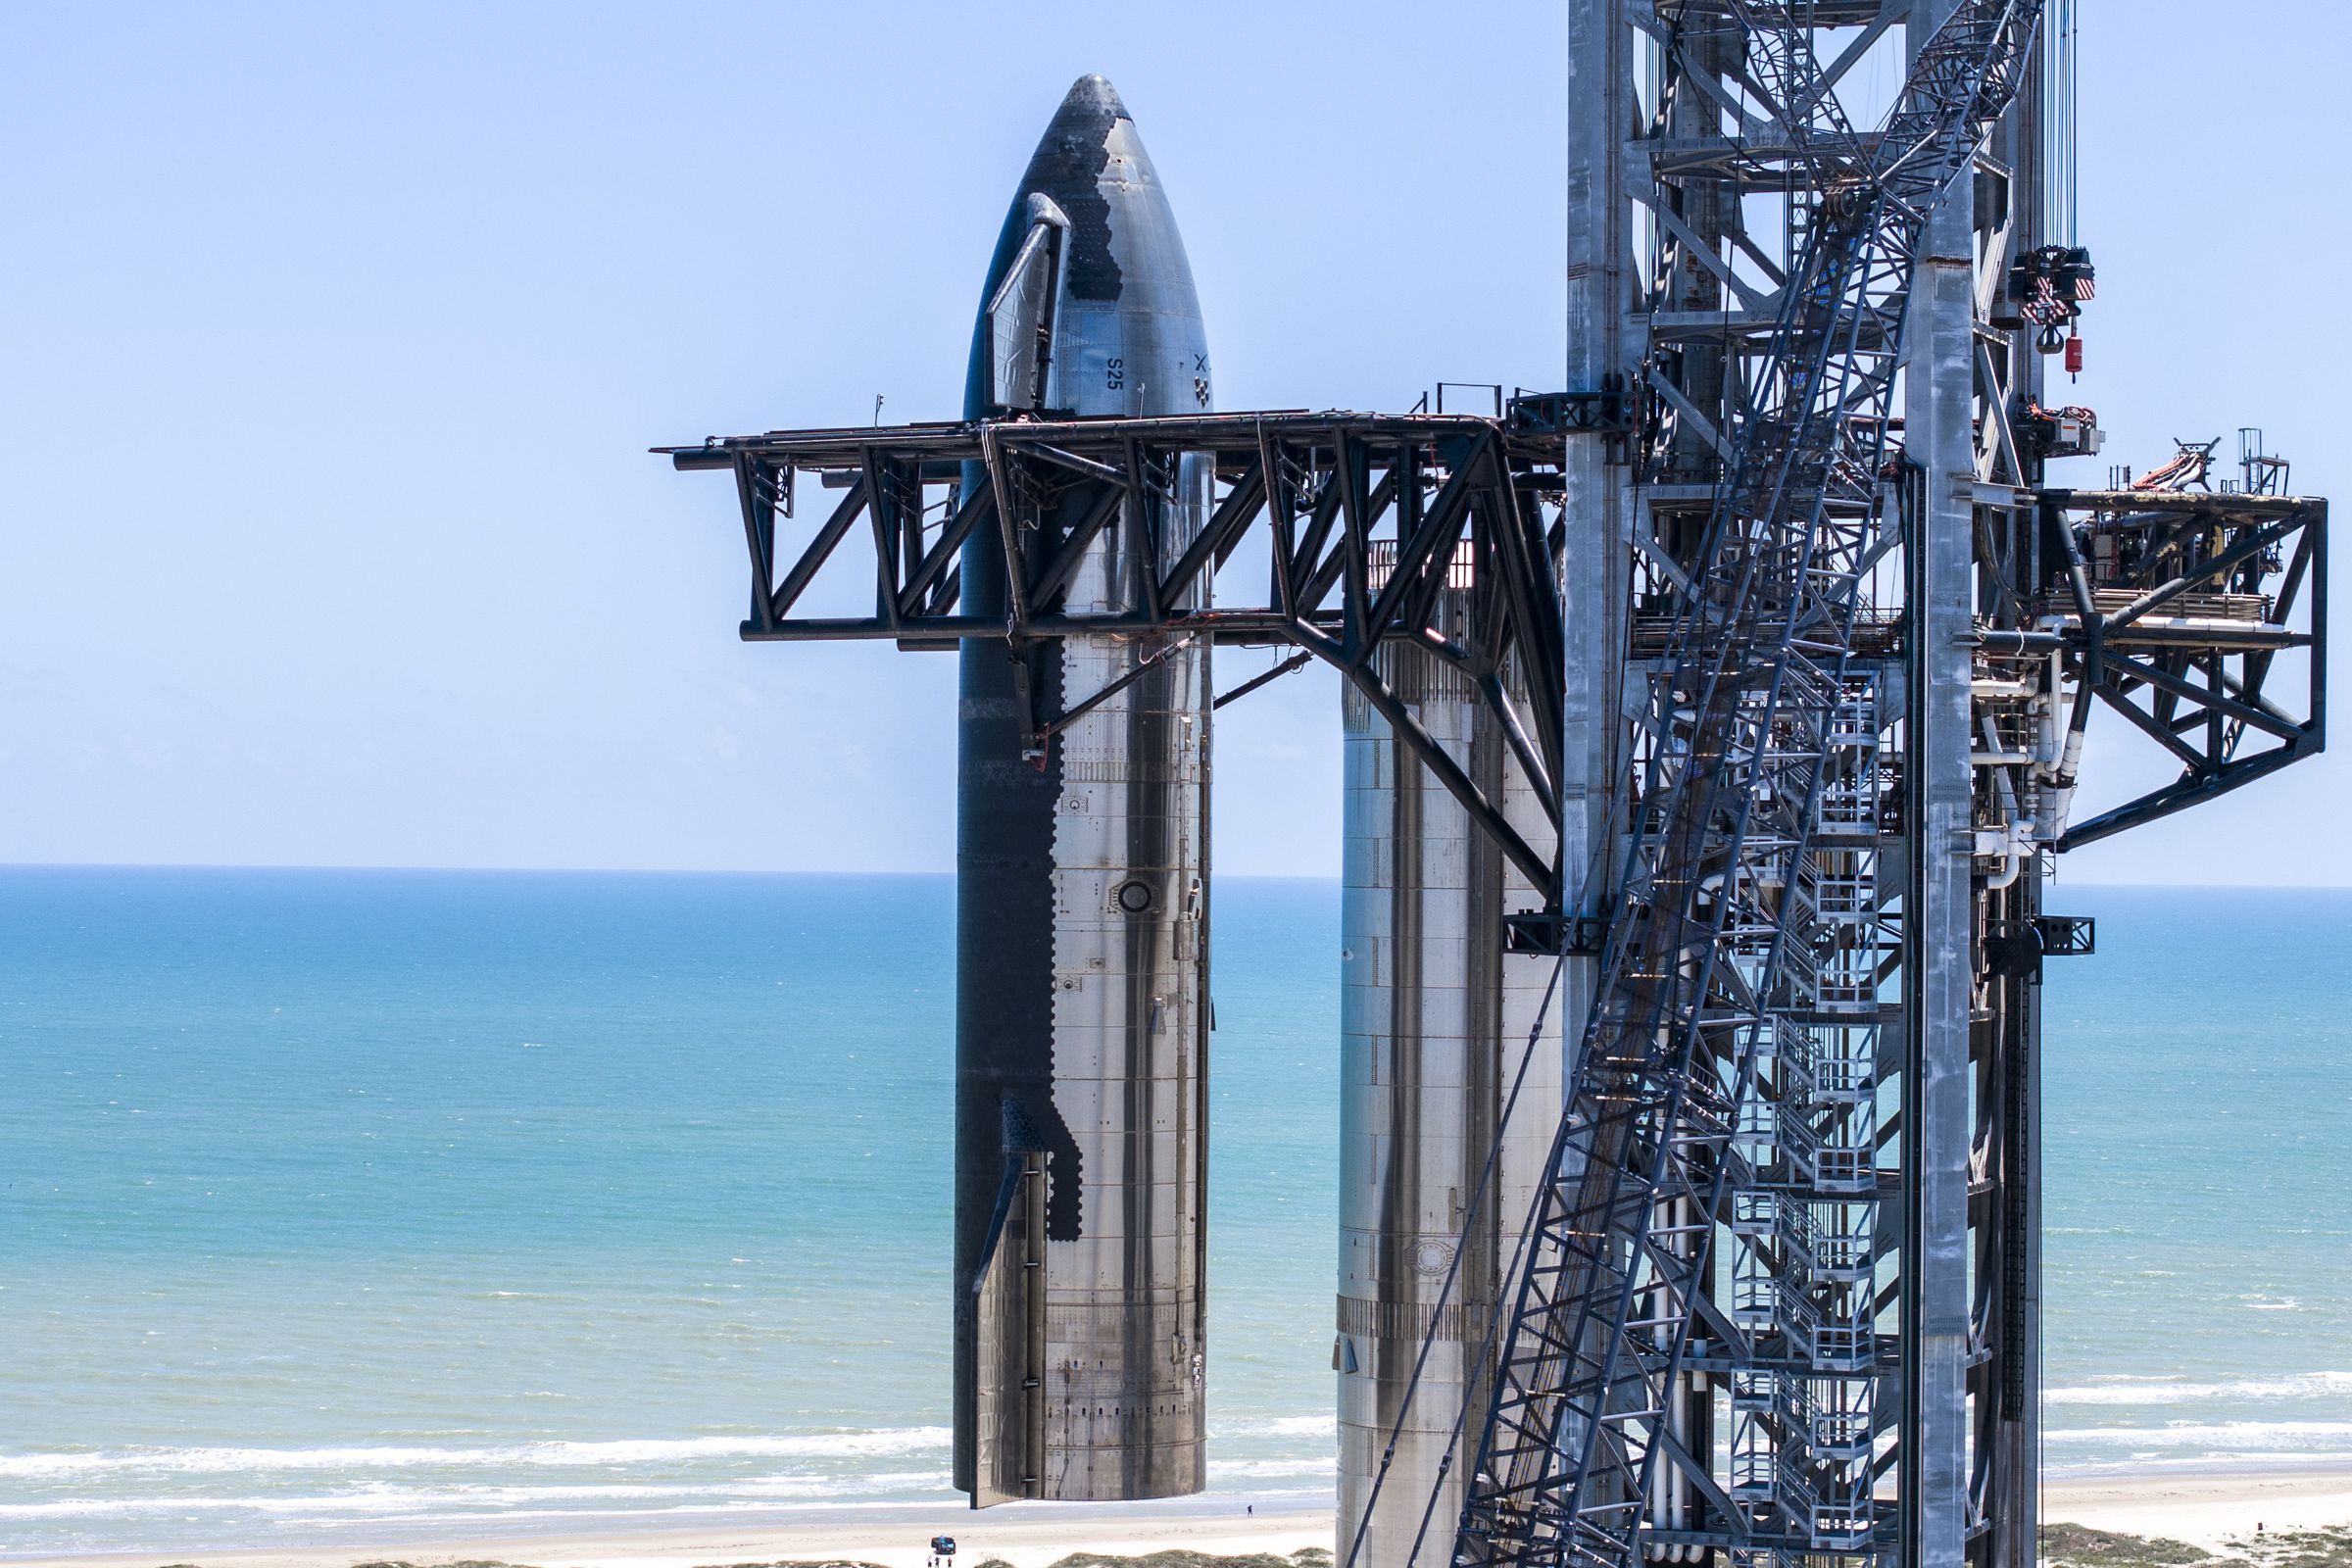 SpaceX Starship protoype shown mounted on a launch tower without the Super Heavy booster rocket attached